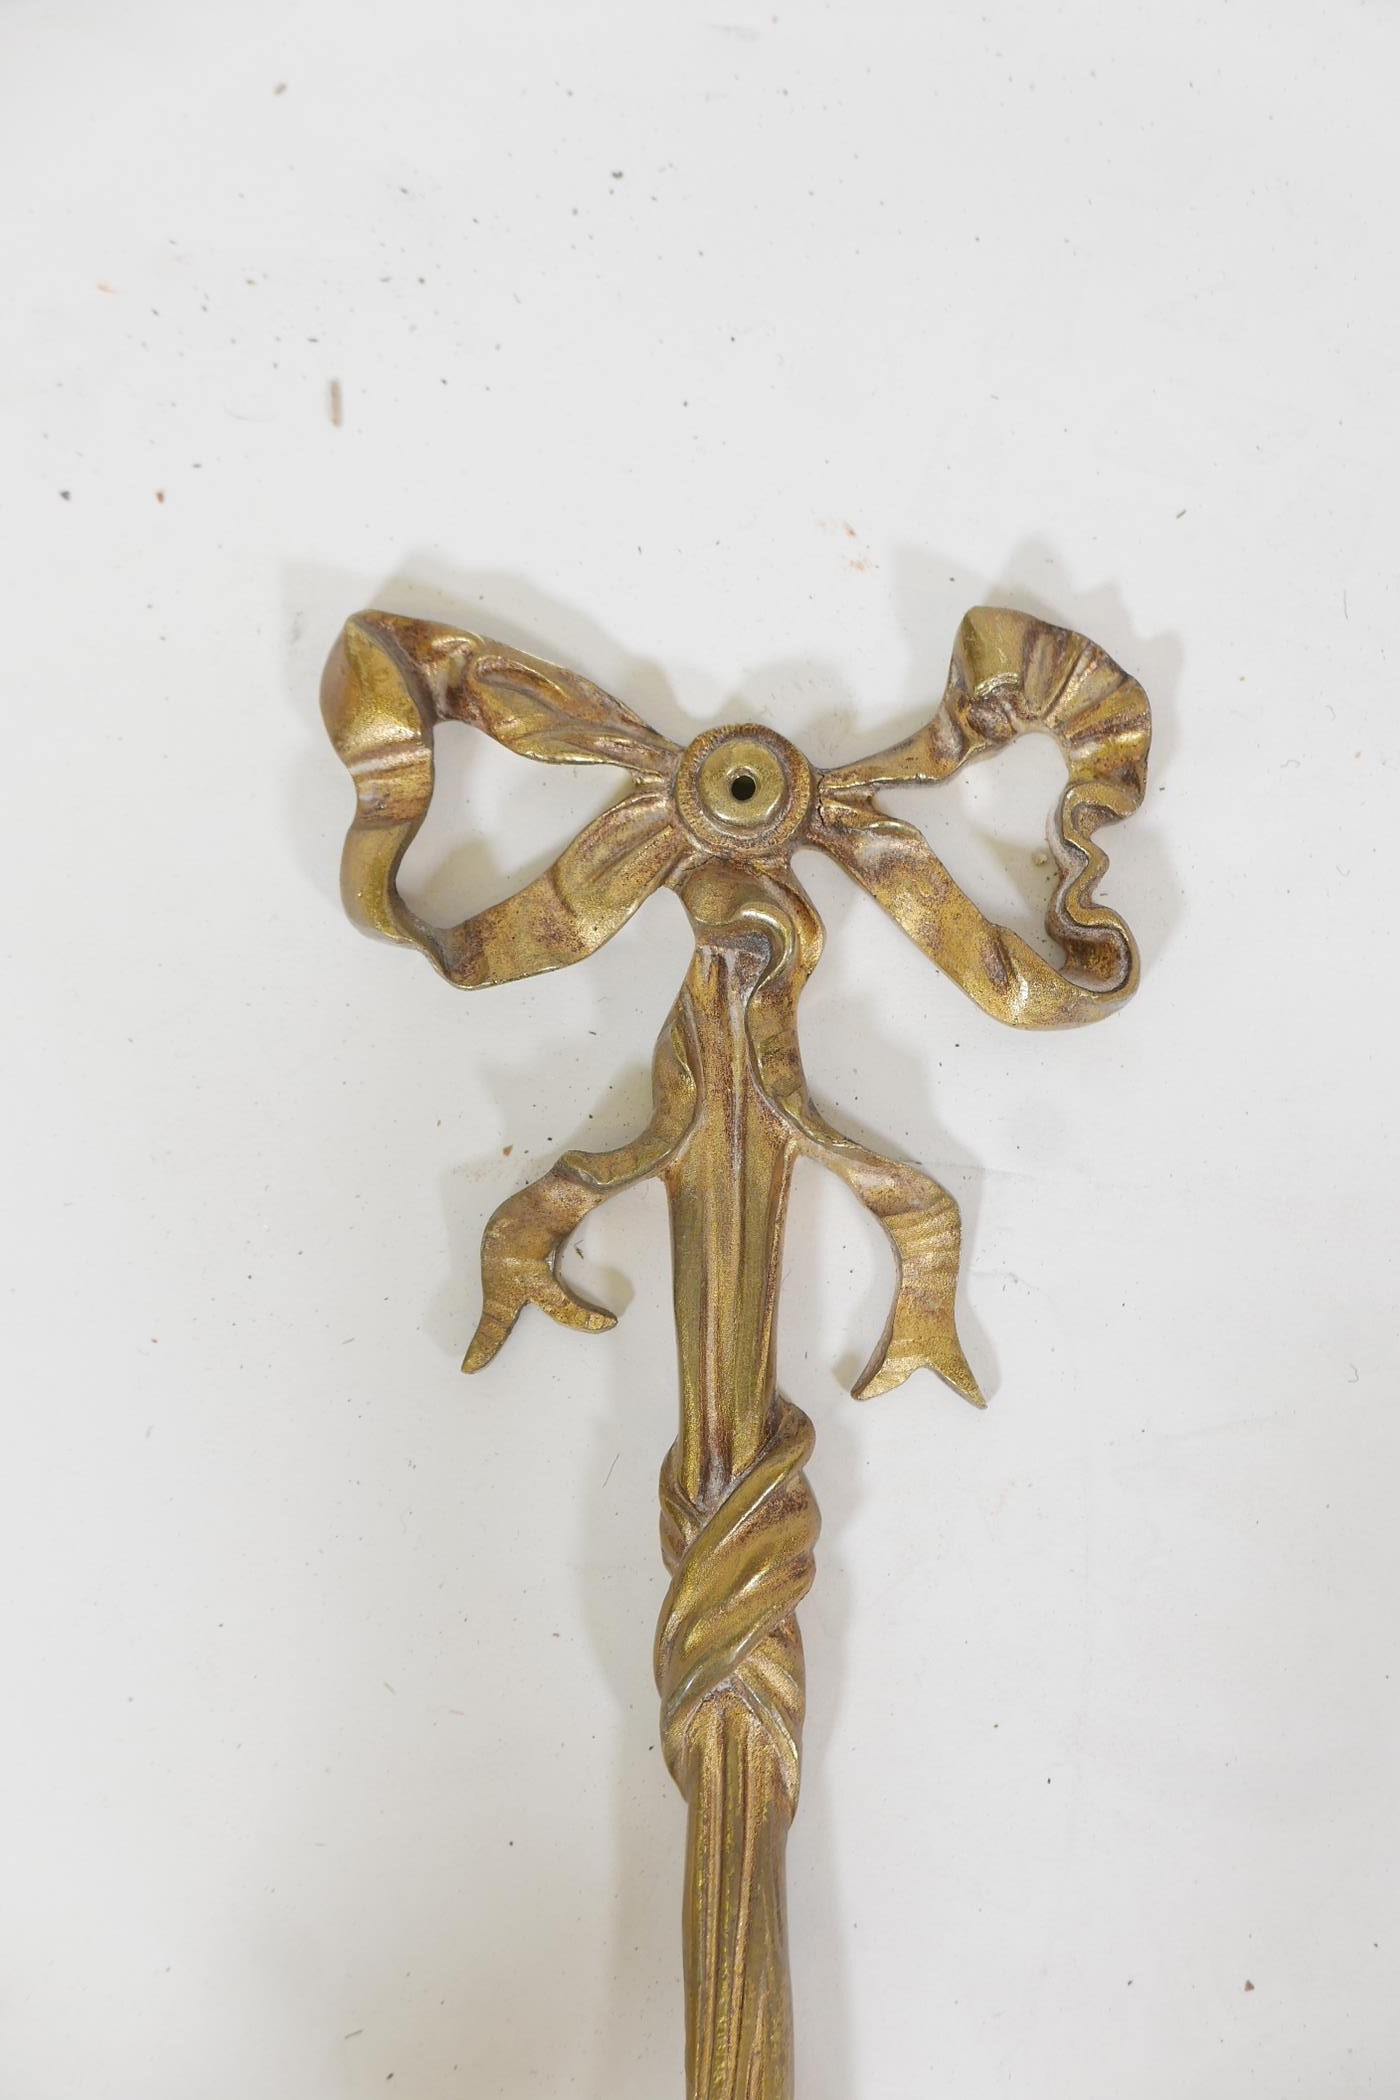 A pair of brass three branch wall sconces, with floral and scroll decoration, 27" high - Image 3 of 4